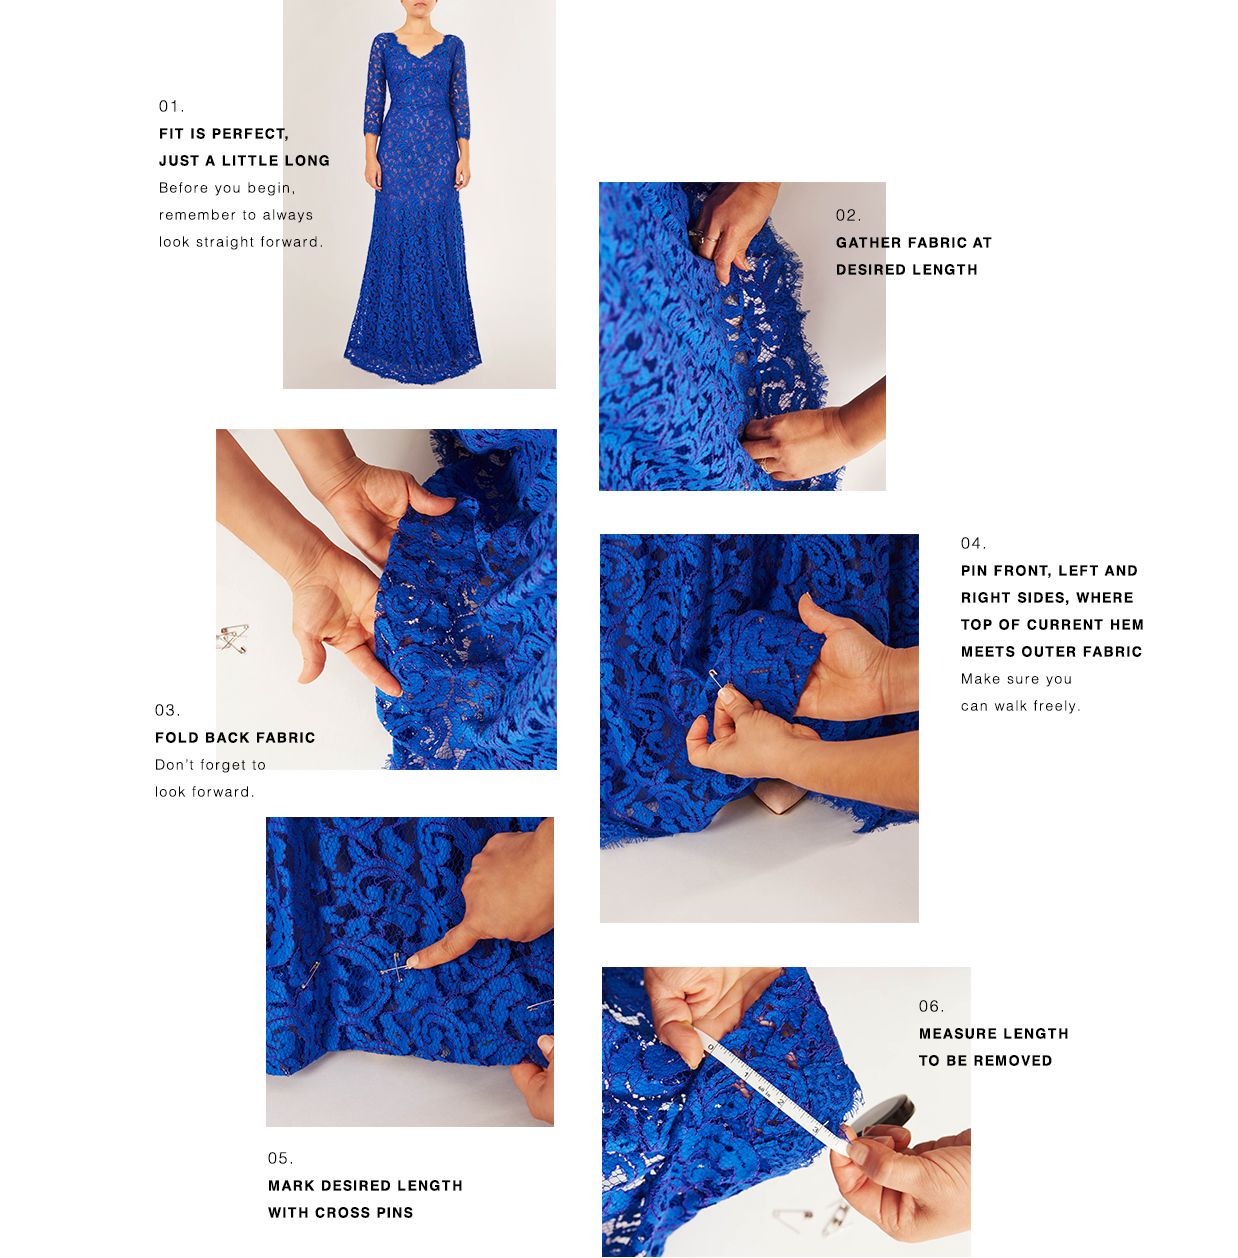 complimentary hemming instructions